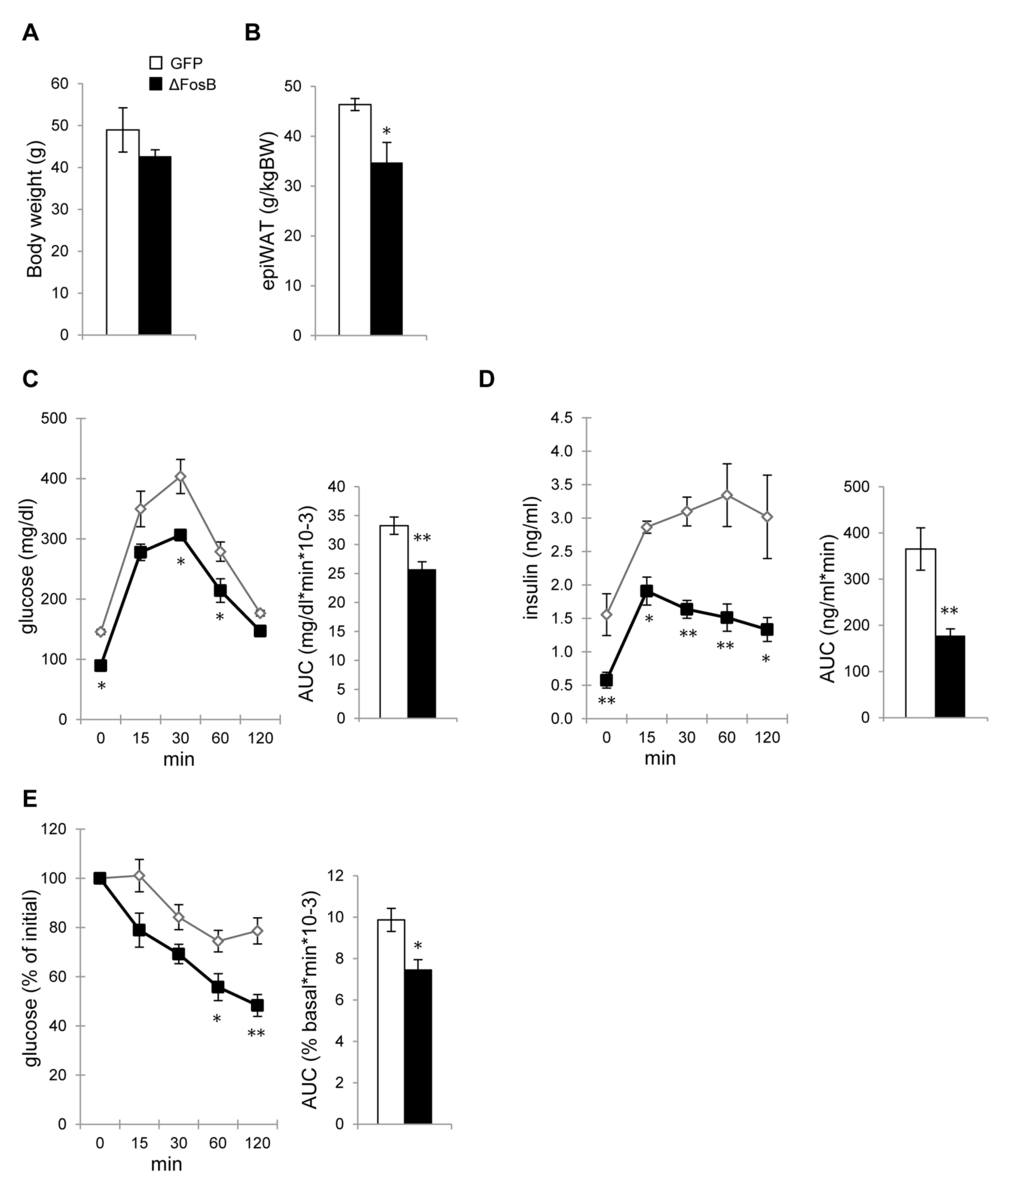 AAV-ΔFosB mice are resistant to age-related adiposity and impairment in glucose metabolism. Mice were stereotaxically injected into VHT with AAV-∆FosB or AAV-GFP and glucose metabolism was assessed 38-40 weeks post-surgically (n=4). (A) Body weight (B) Abdominal epididymal fat pad weight (C) GTT glucose (D) GTT insulin. (E) ITT glucose. Data are expressed as mean ± SEM. *p